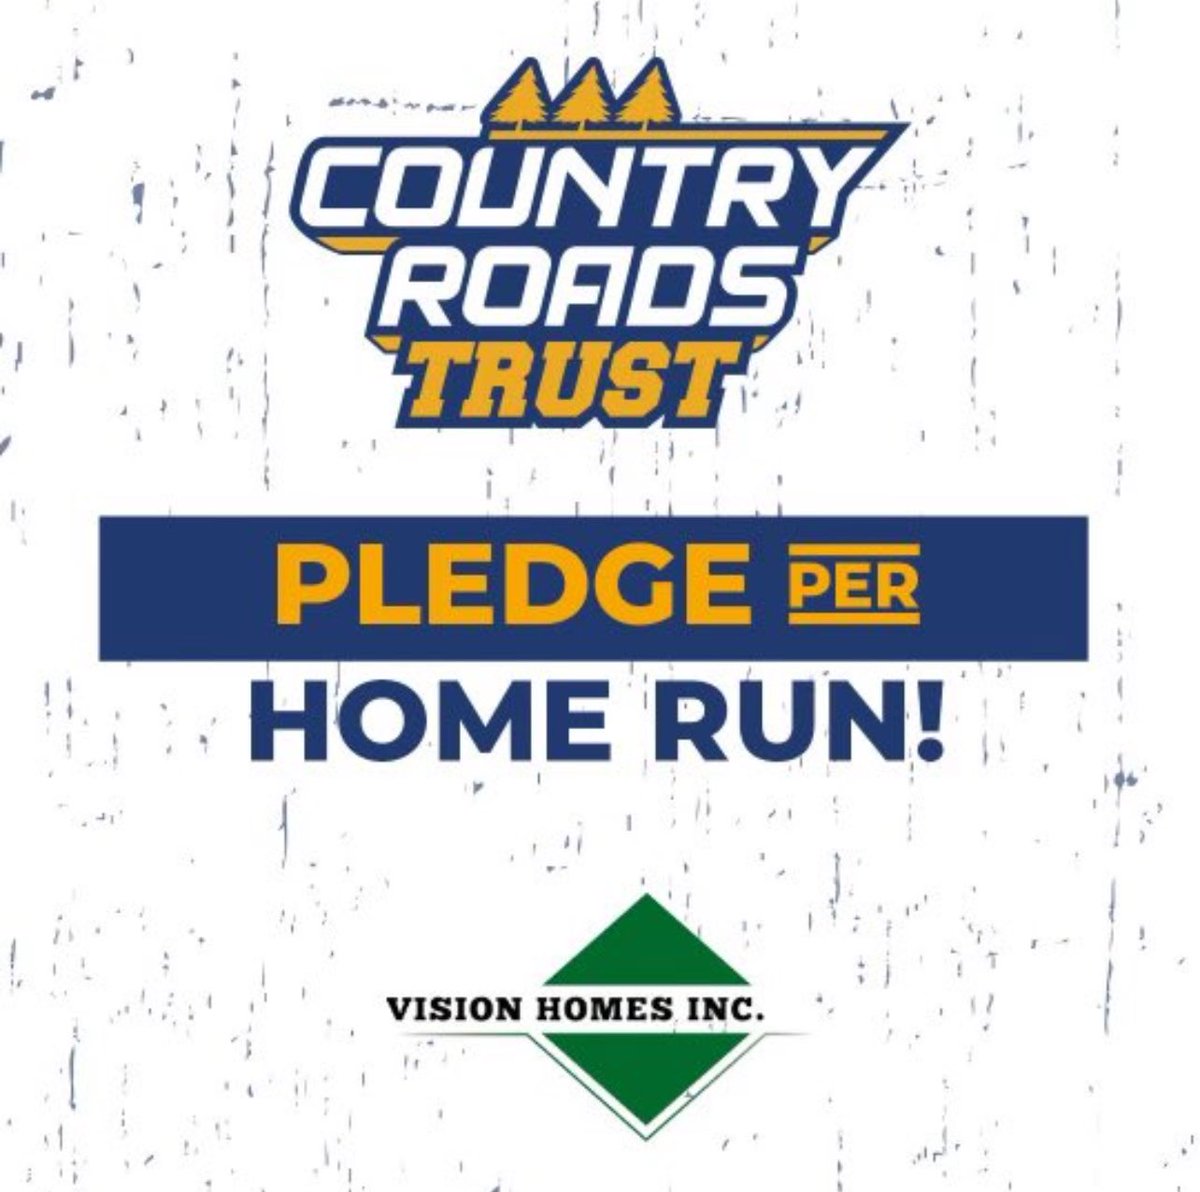 Support my teammates and I by joining our pledge per homerun program! @CountryRdsTrust countryroadstrust.com/pledge-per-hom…